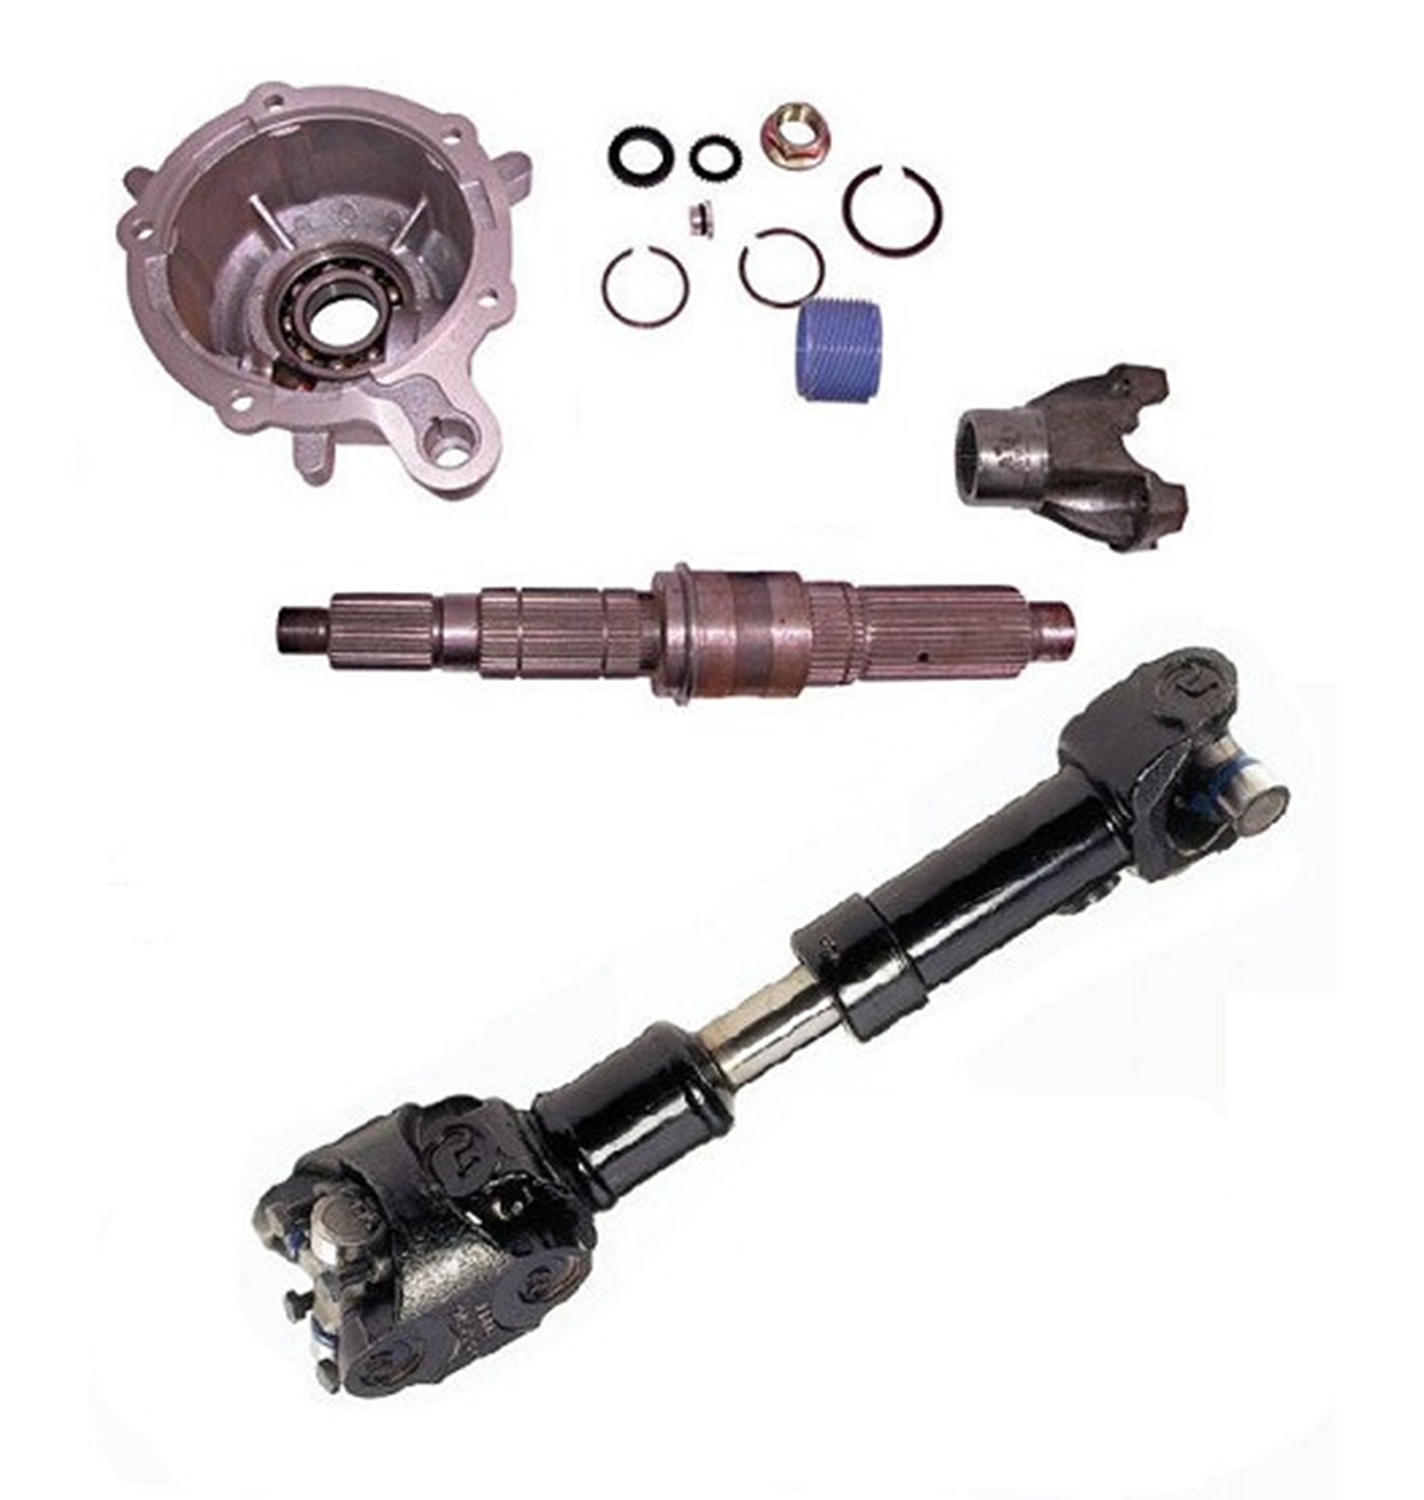 Rough Trail Sye Kit and Heavy Duty 1310 CV Driveshaft Package